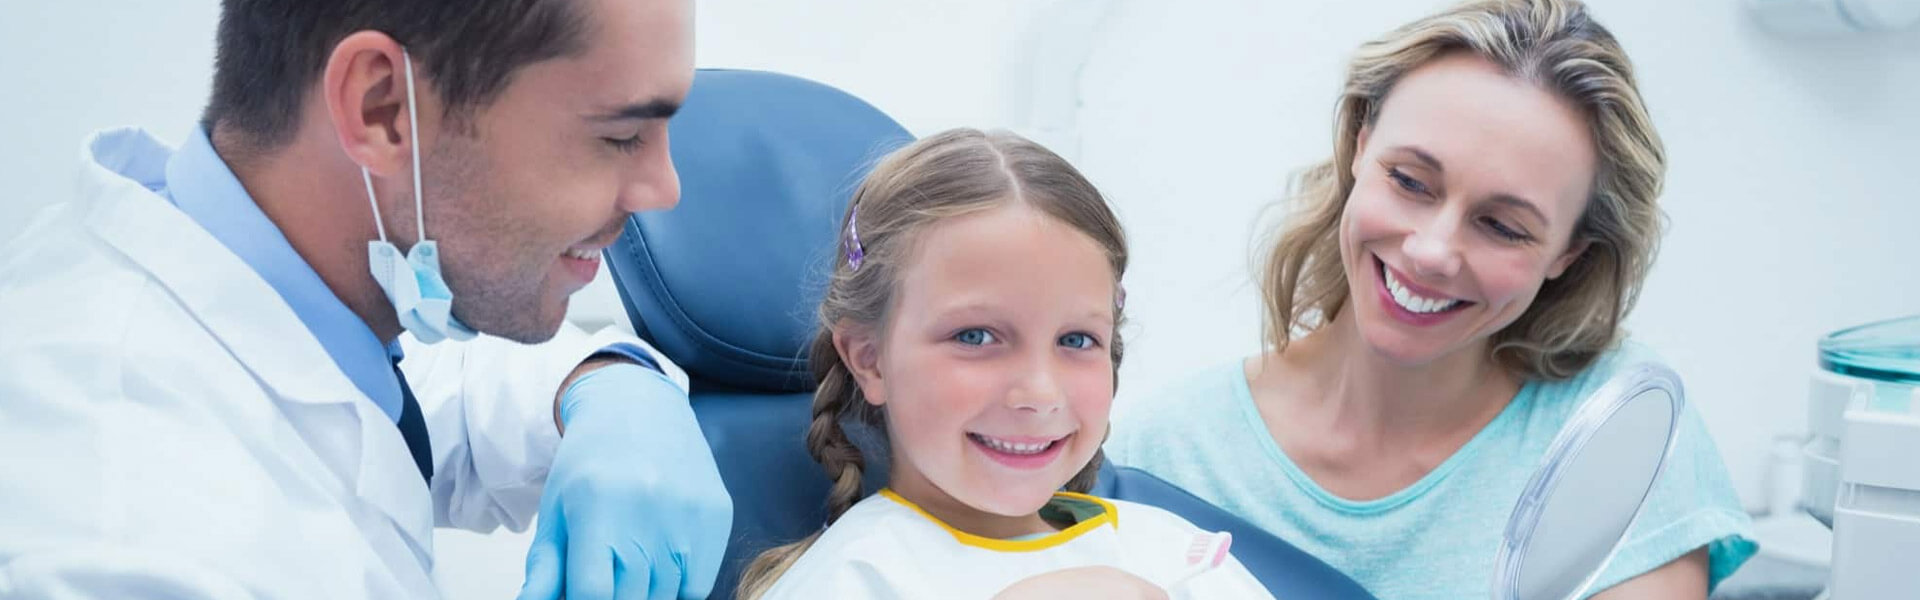 Is a Laser Frenectomy the Right Choice for Your Child?